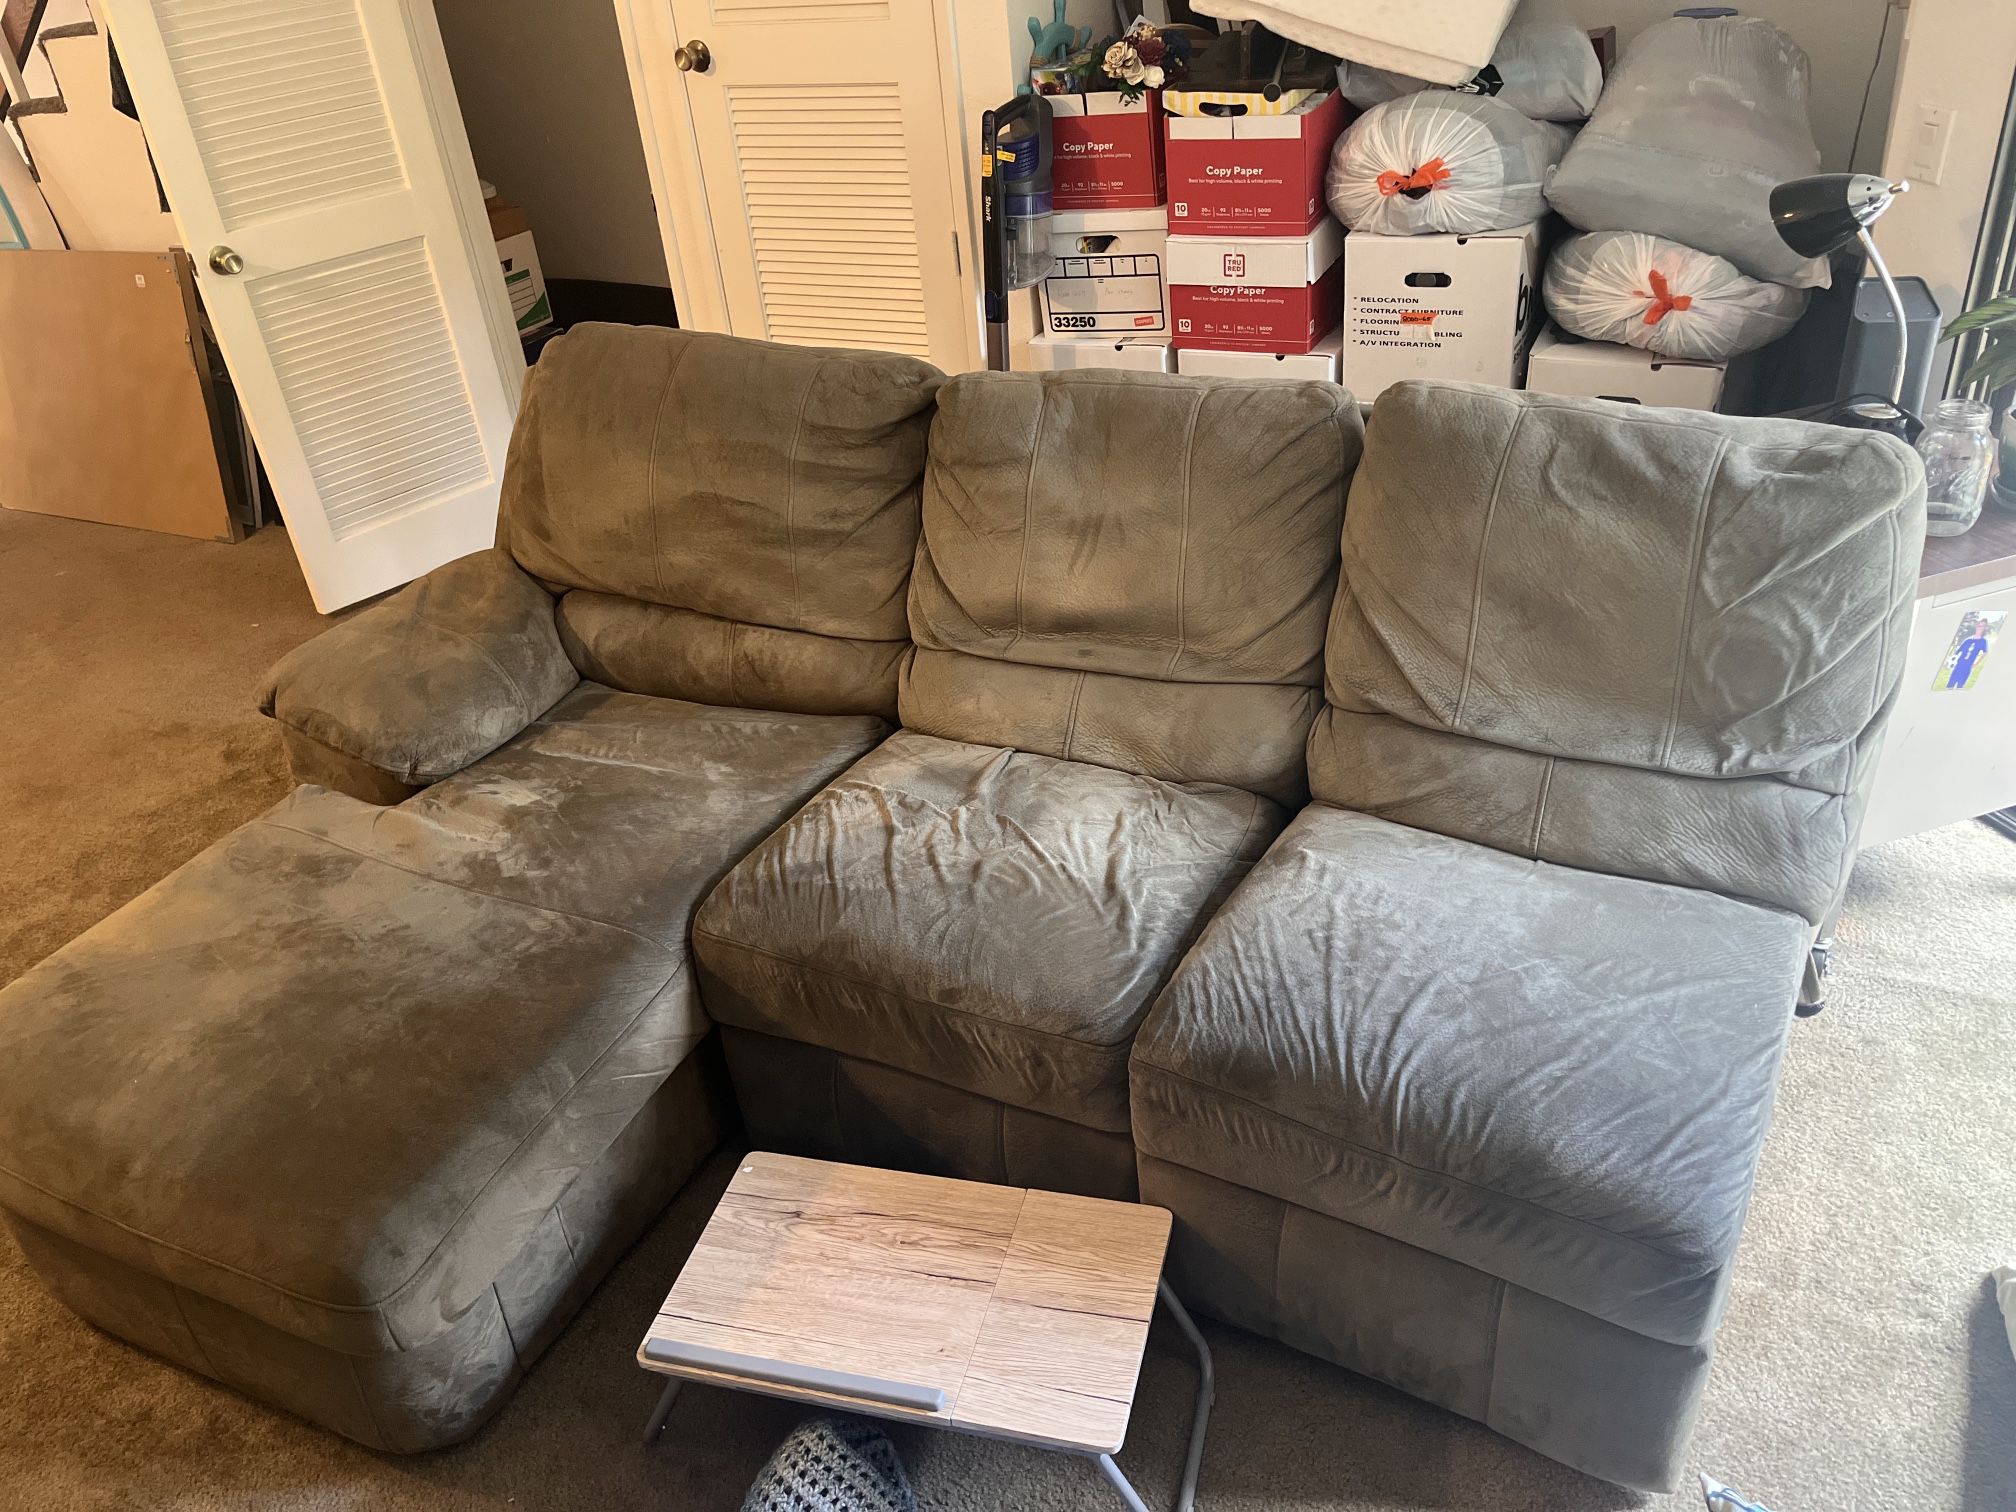 FREE Reclining Couch 